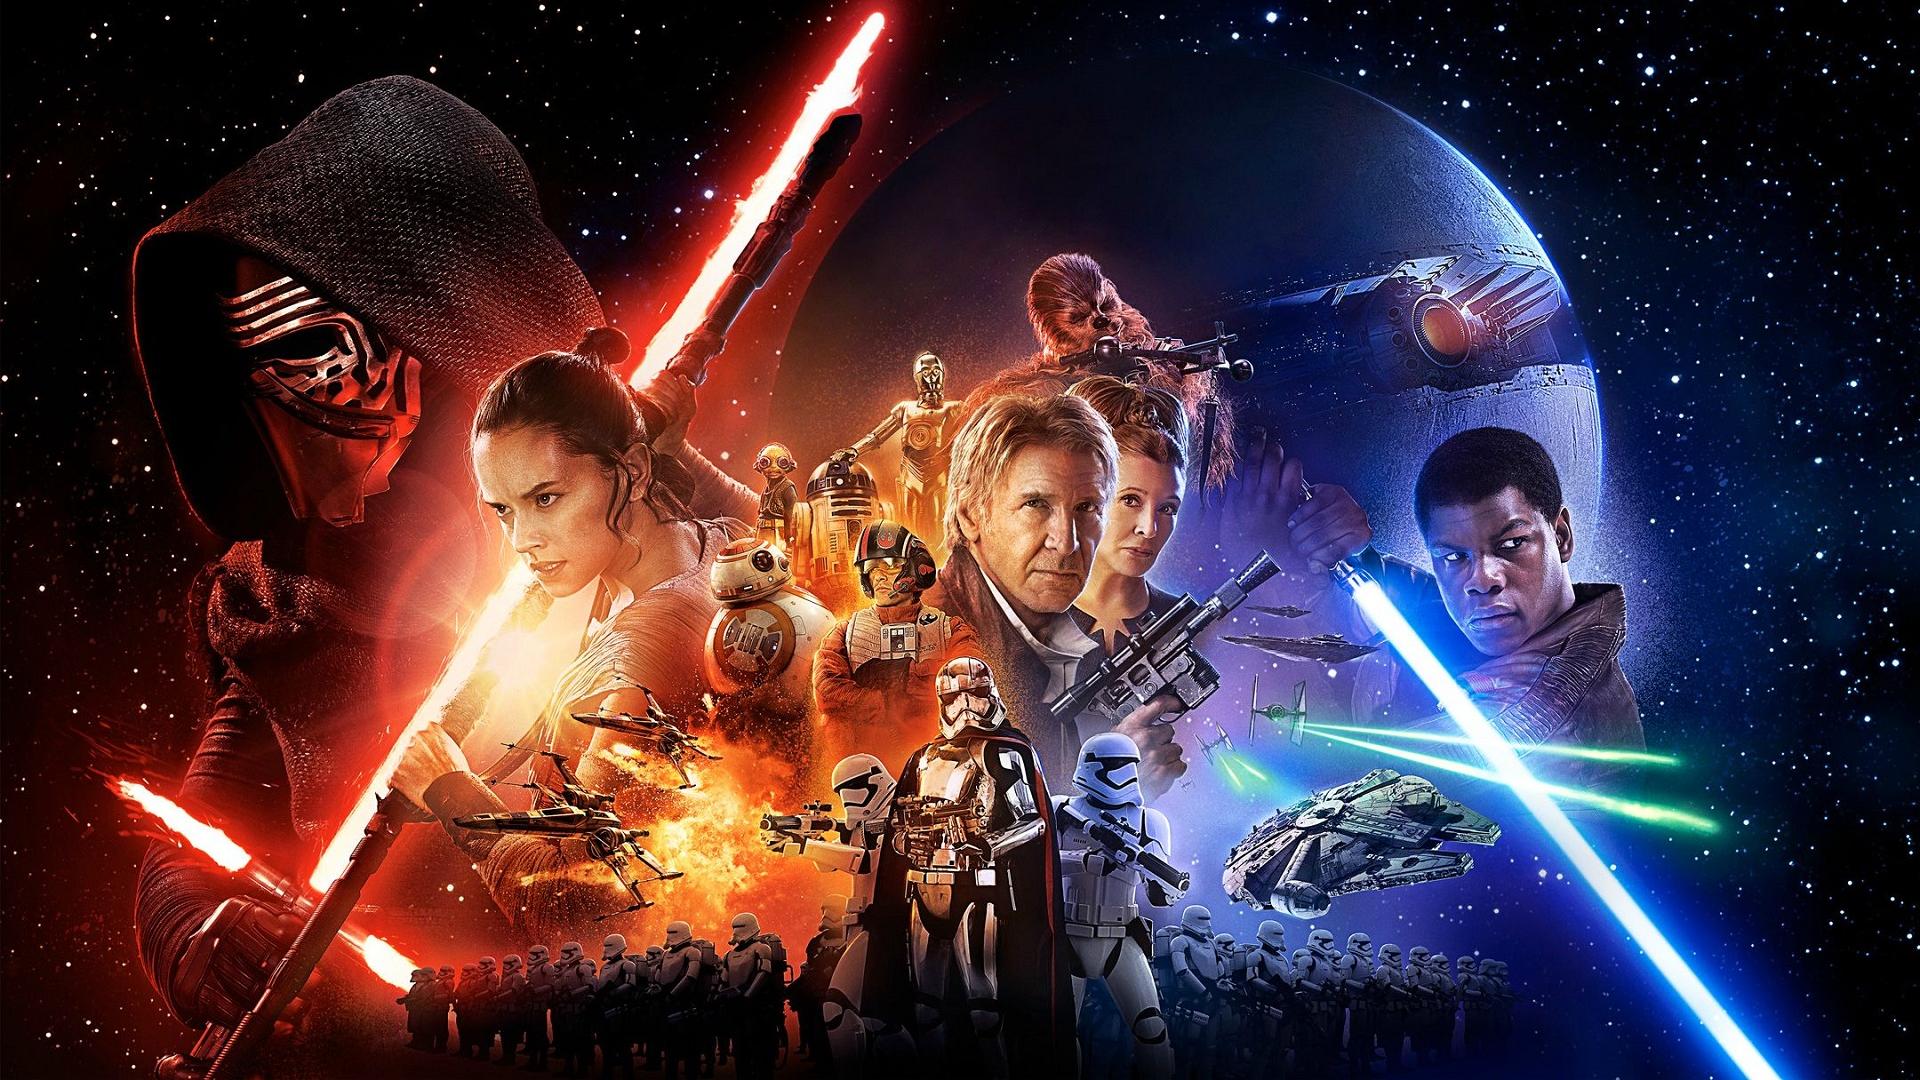 Star Wars   The Force Awakens Poster [1920 x 1080] wallpapers 1920x1080